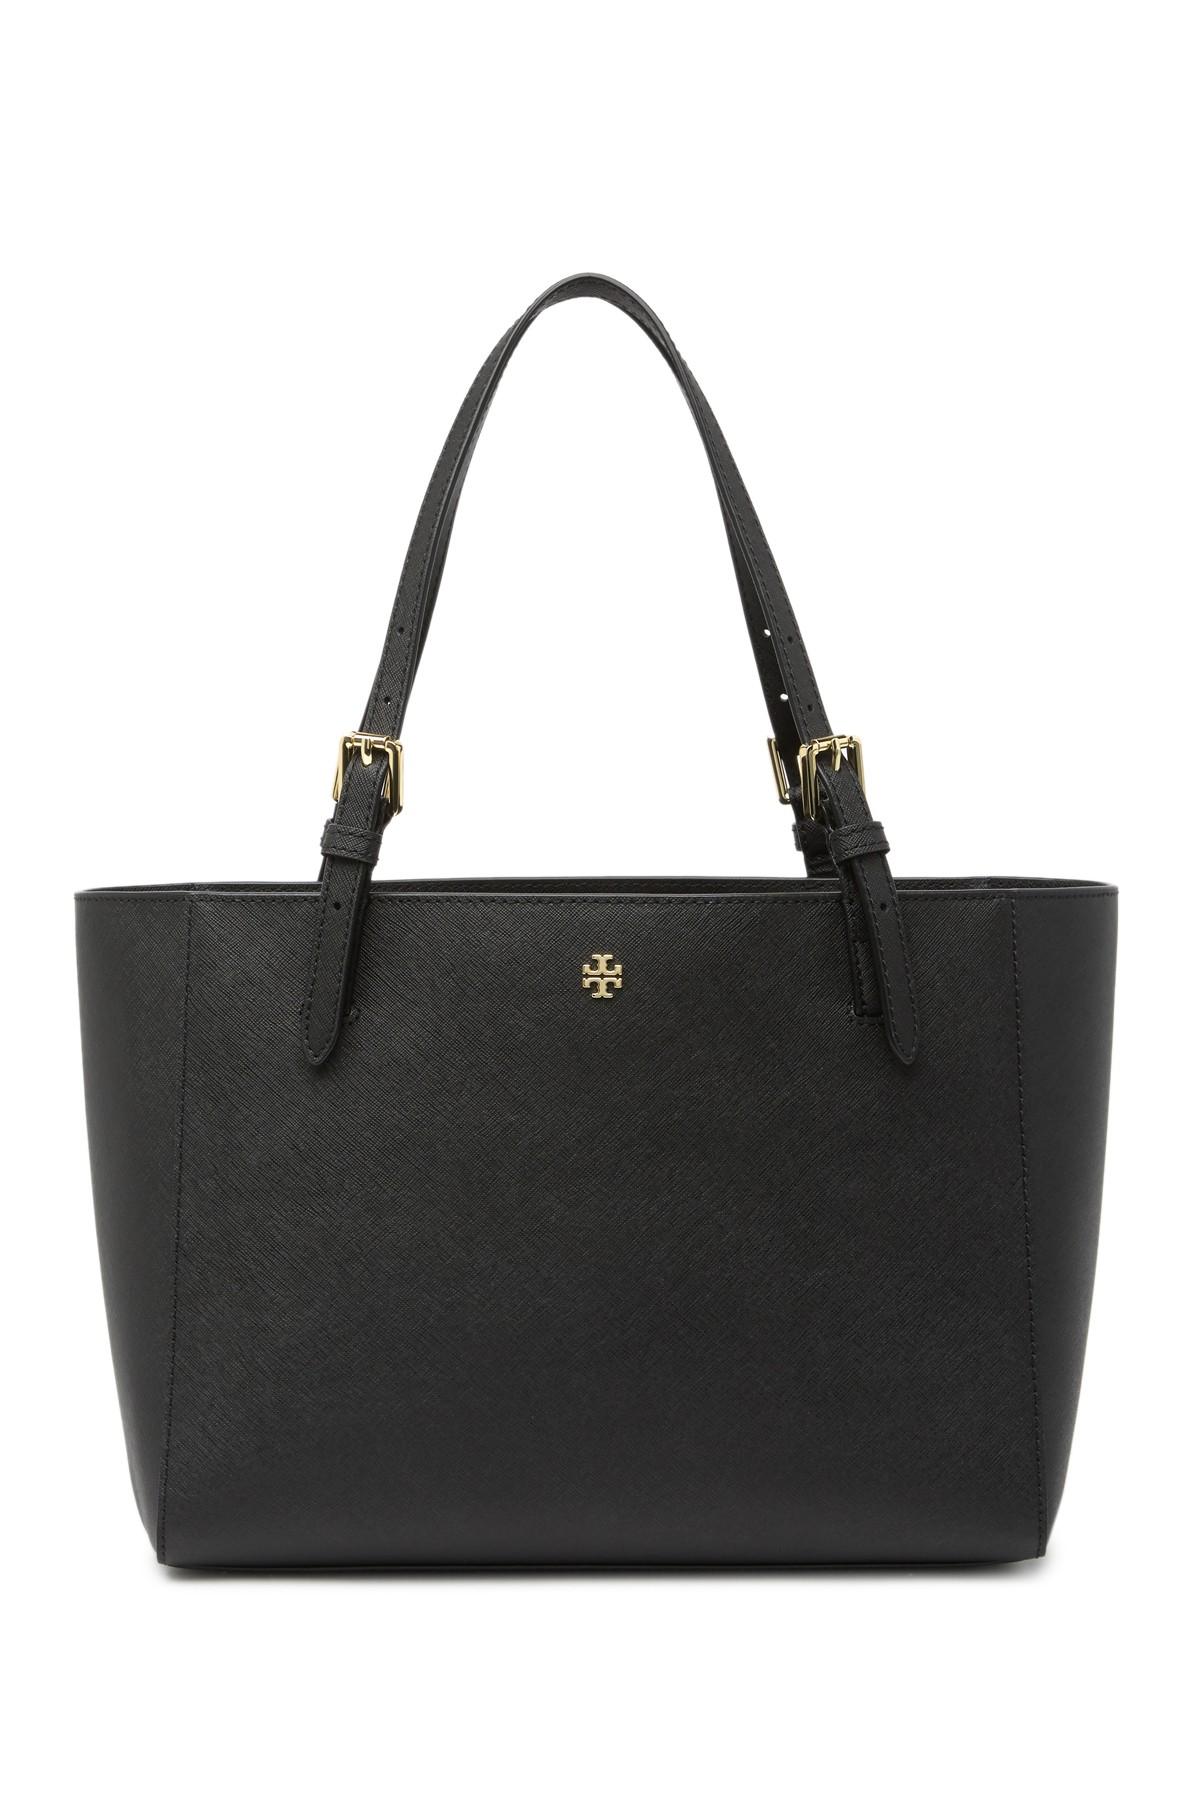 Tory Burch Emerson Large Buckle Leather Tote